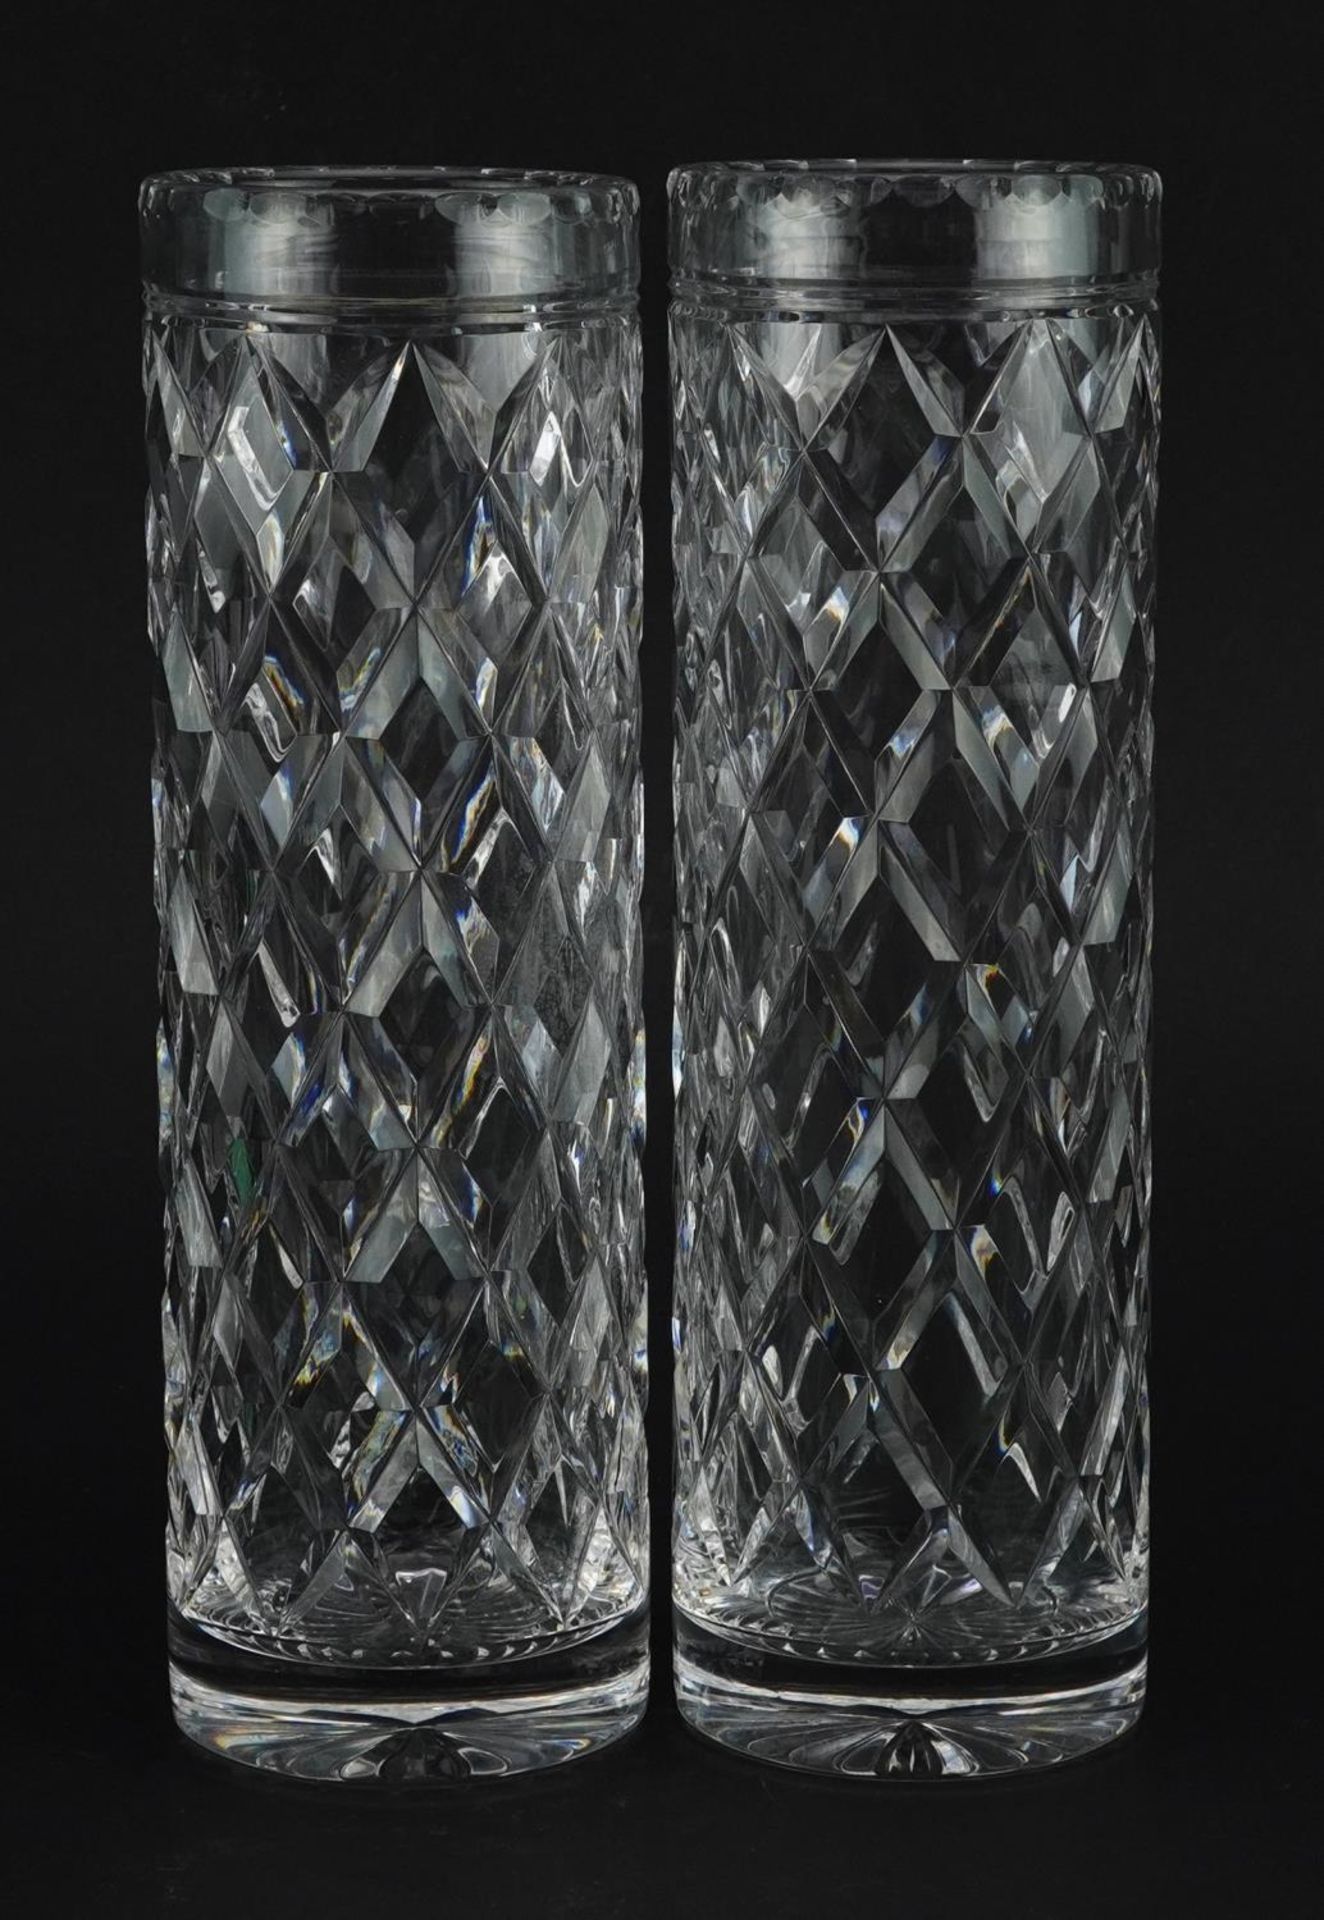 Pair of Stewart Crystal cylindrical vases, each 25.5cm high : For further information on this lot